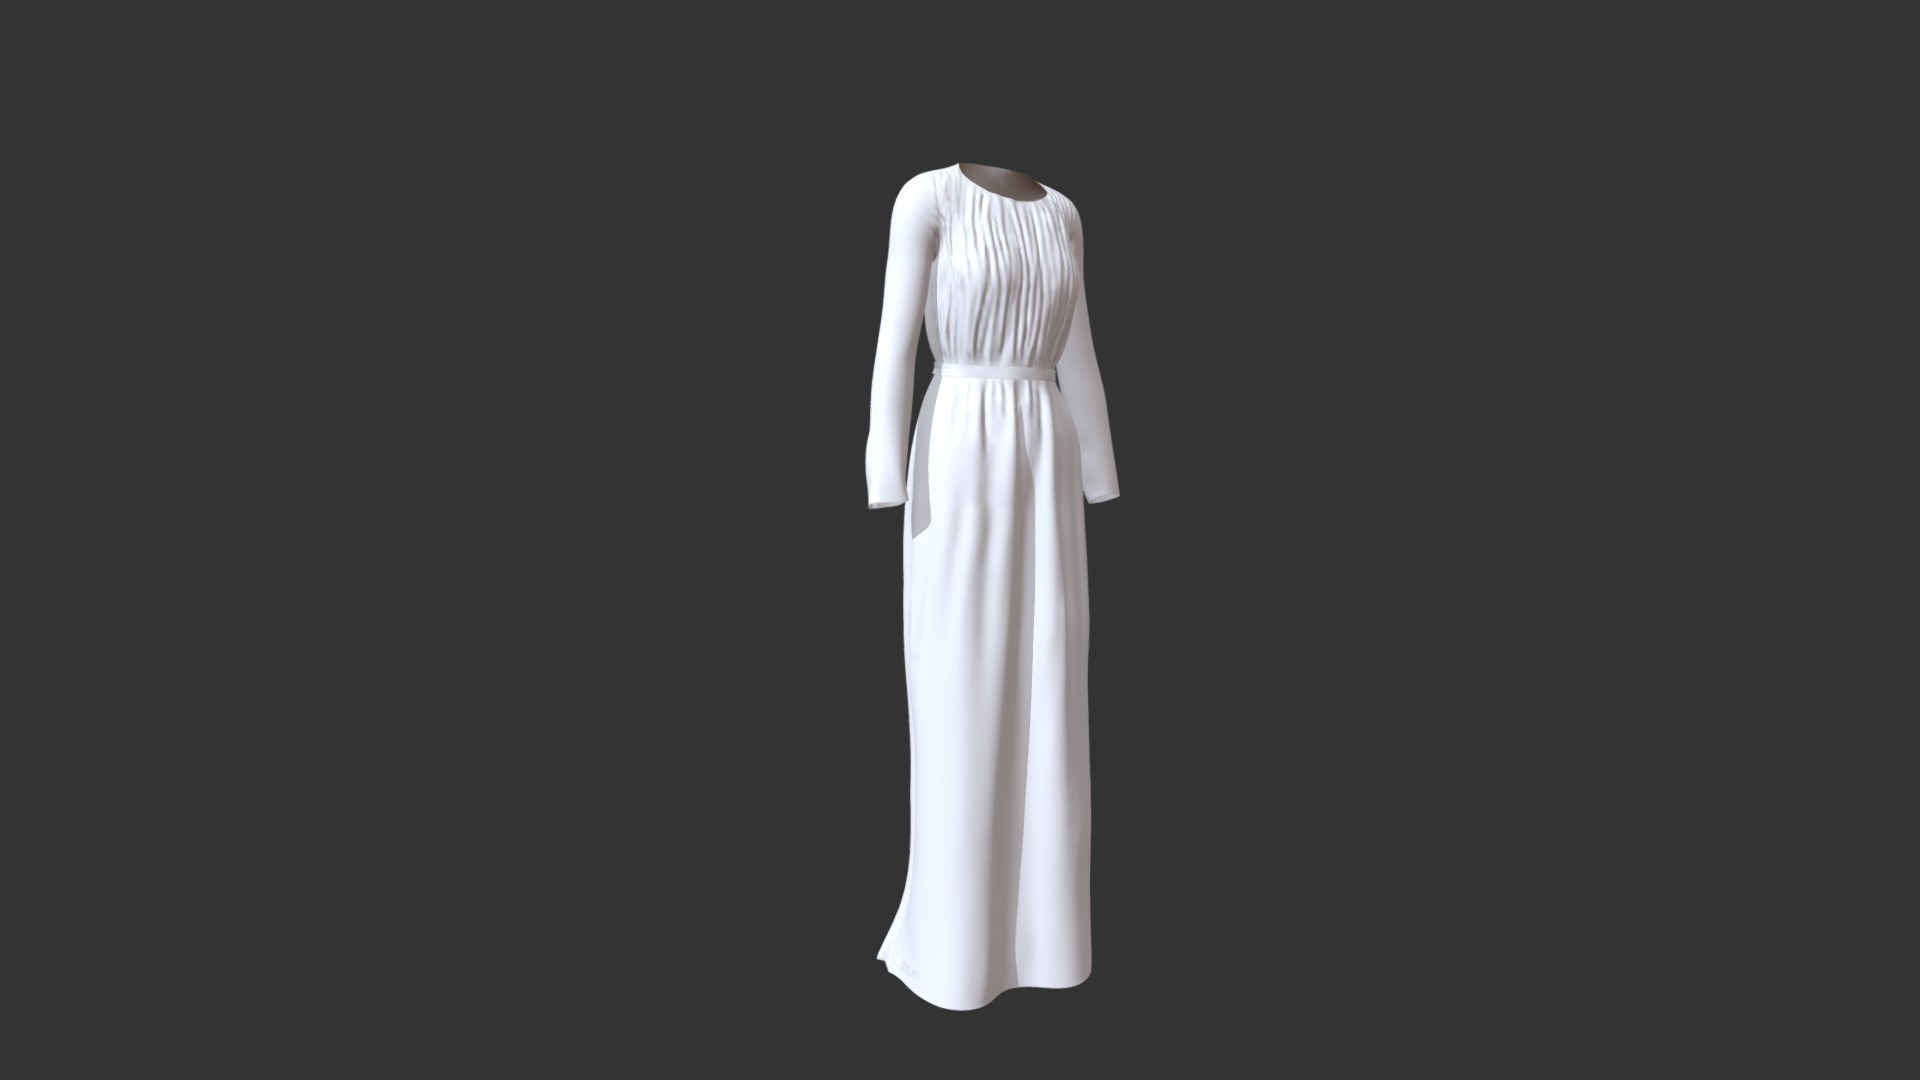 3D model white Dress - This is a 3D model of the white Dress. The 3D model is about a white dress on a black background.